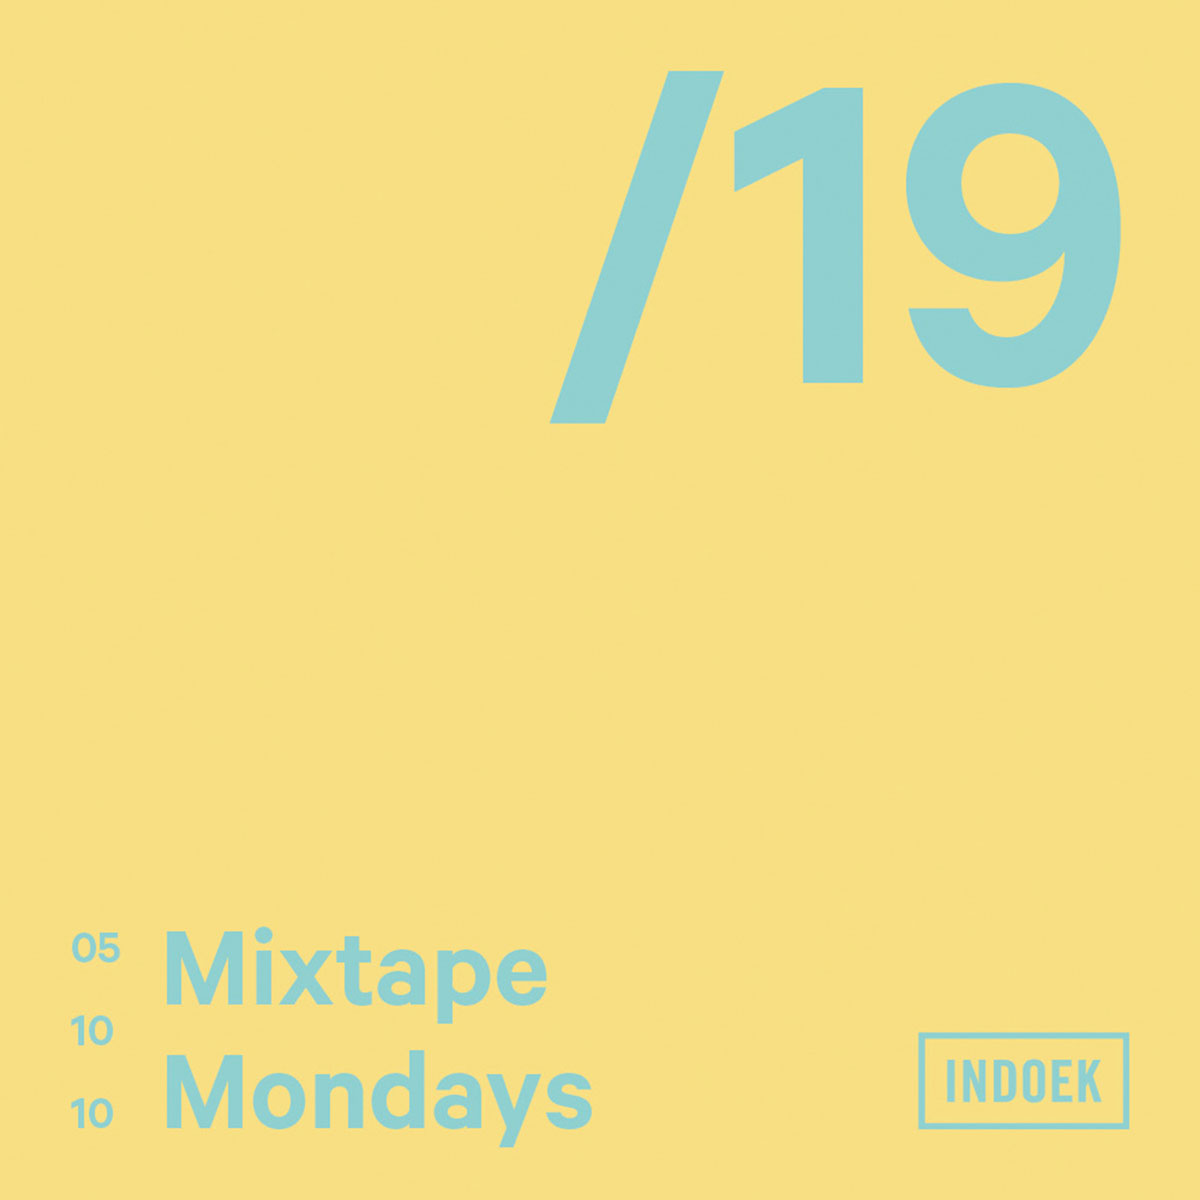 mixtape mondays cover in yellow and blue